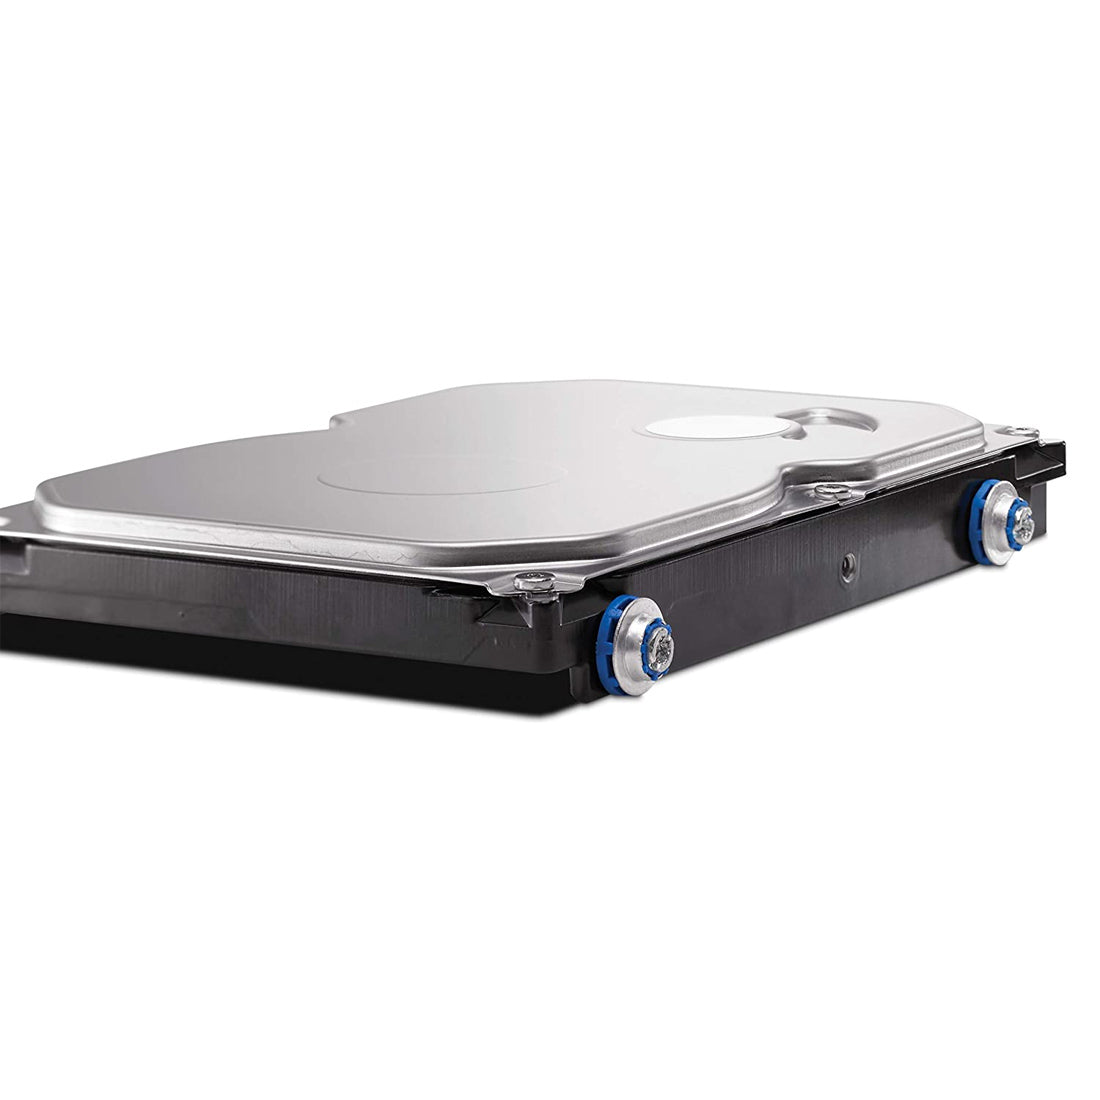 HP QK555AA 1TB 3.5-inch 7200 RPM Internal Hard Disk with Native Command Queuing